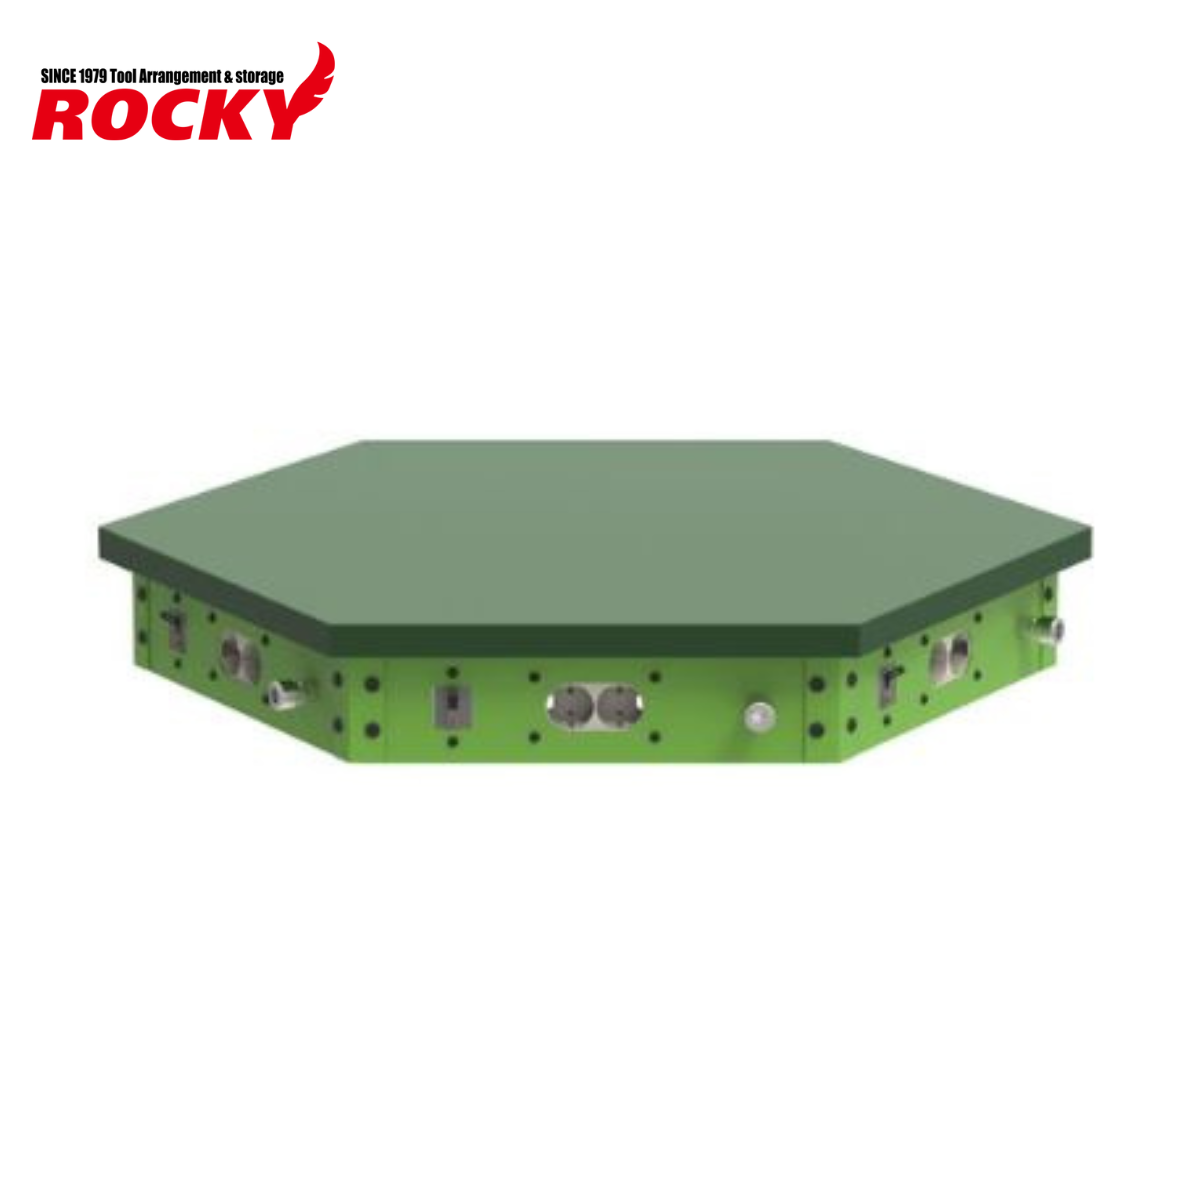 ROCKY : (Acc) Sub Table for HEX. Workbench 2400 mm